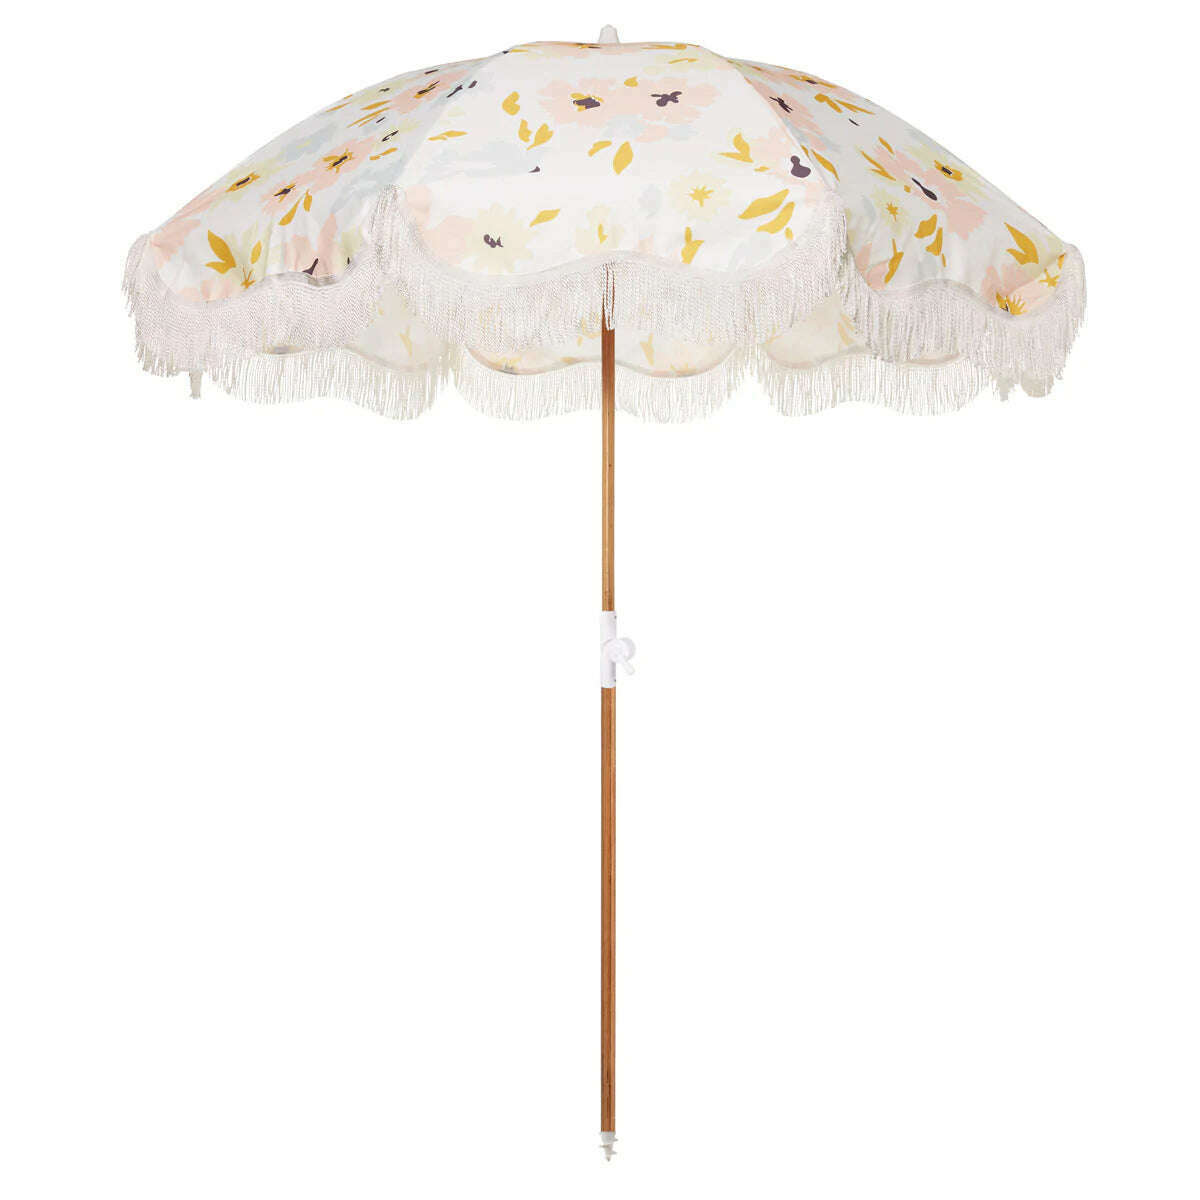 Impodimo Living & Giving:The Holiday Beach Umbrella - Abstract Floral:Business & Pleasure Co